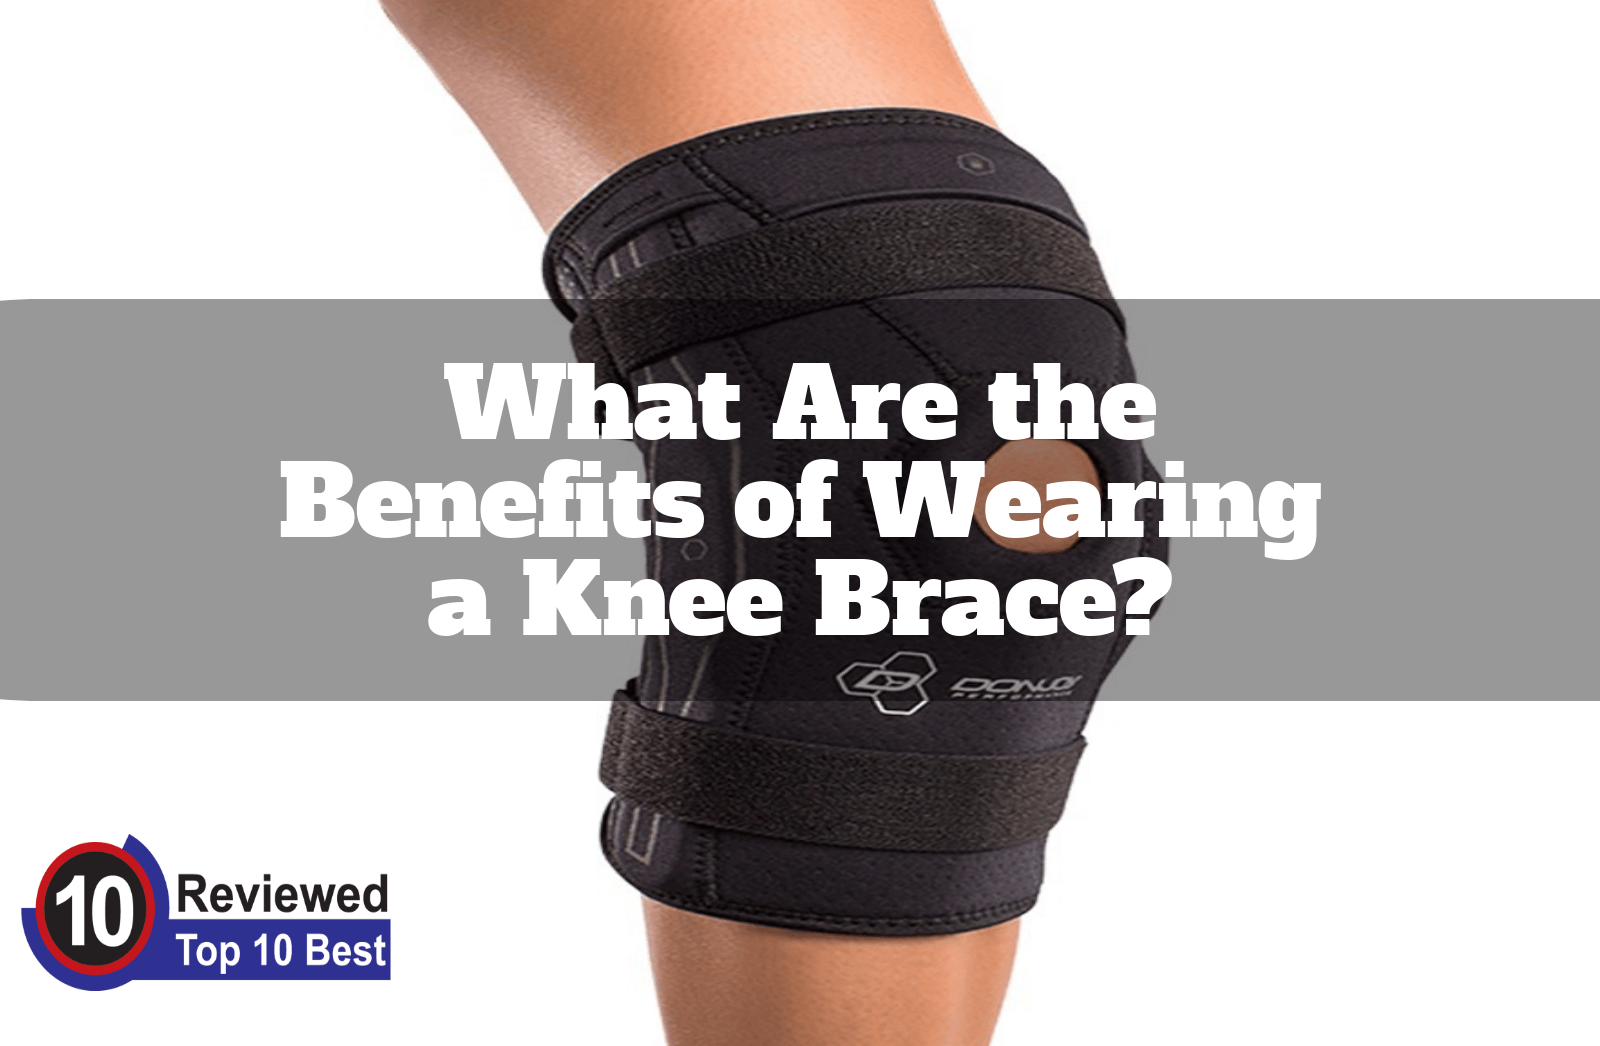 What Are the Benefits of Wearing a Knee Brace? | Ten Reviewed